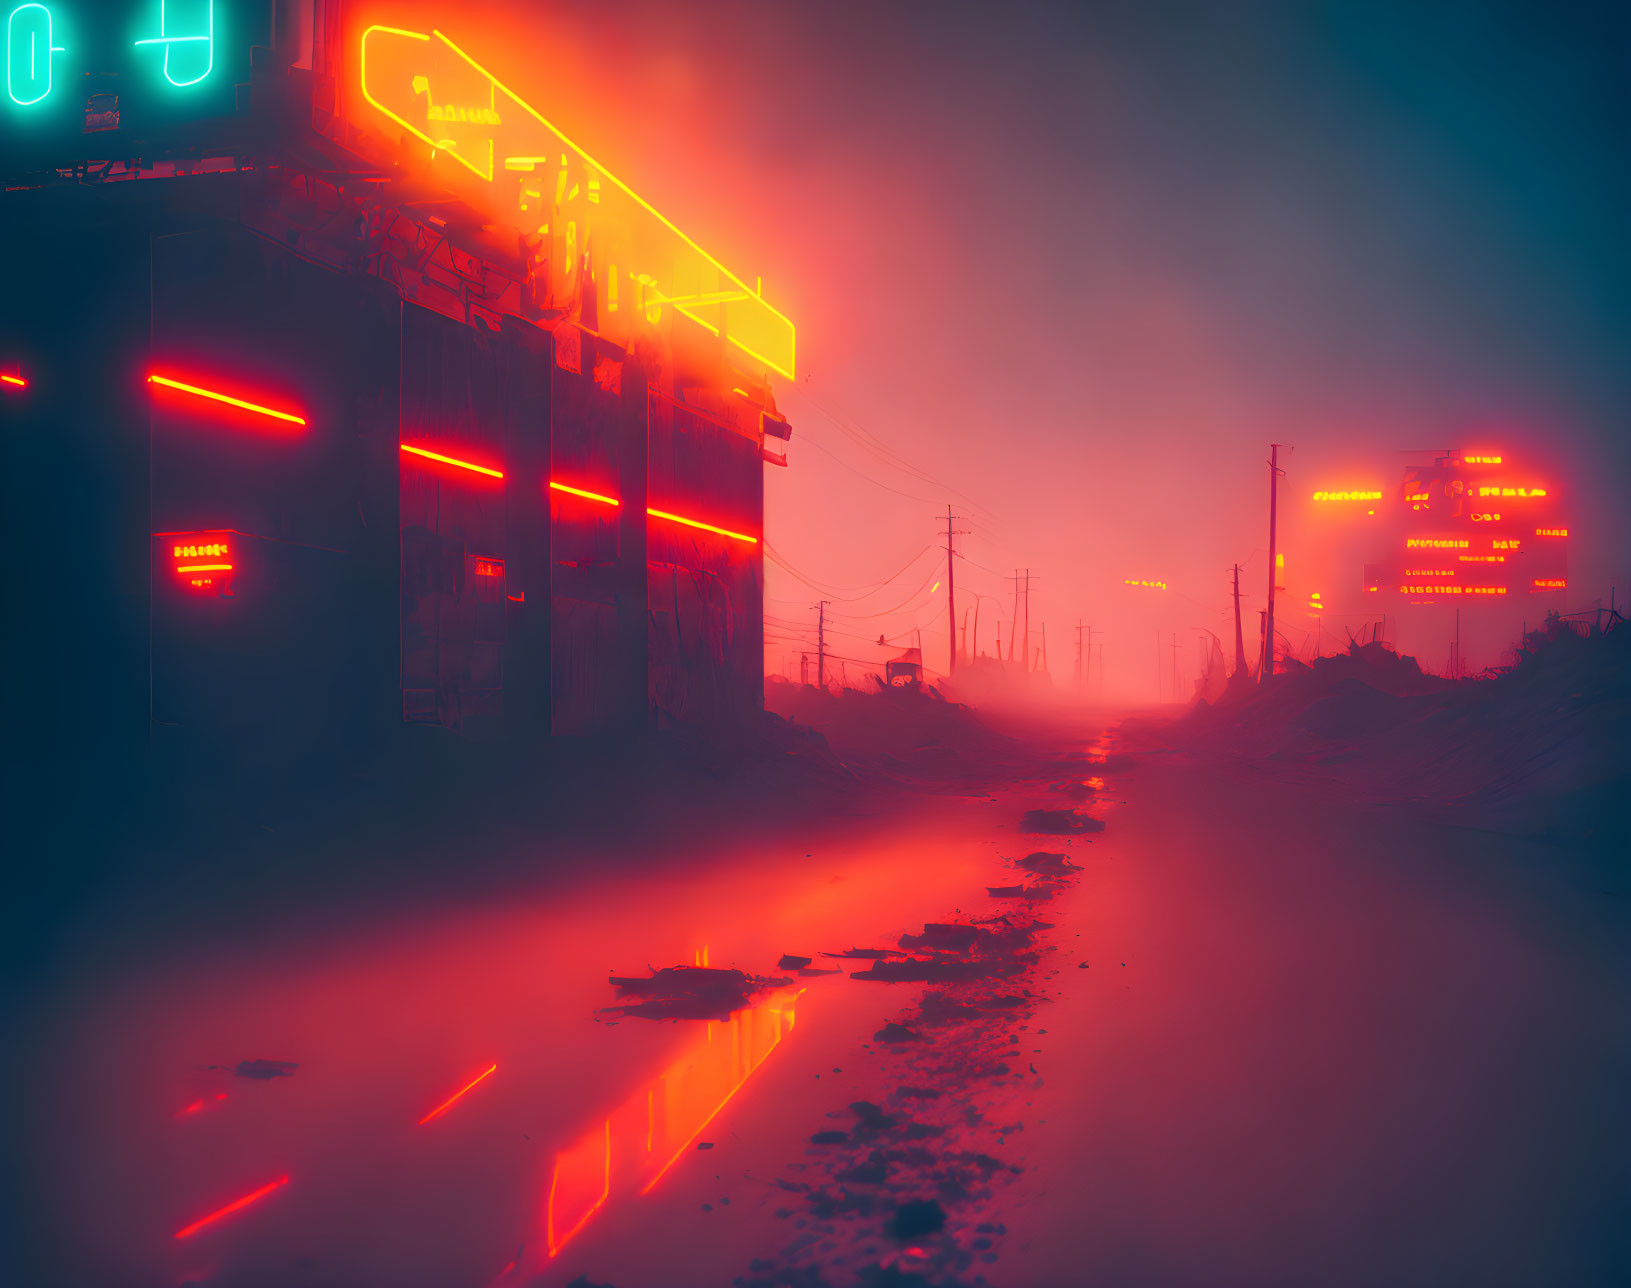 Neon-soaked street in foggy dystopian setting with glowing signs.